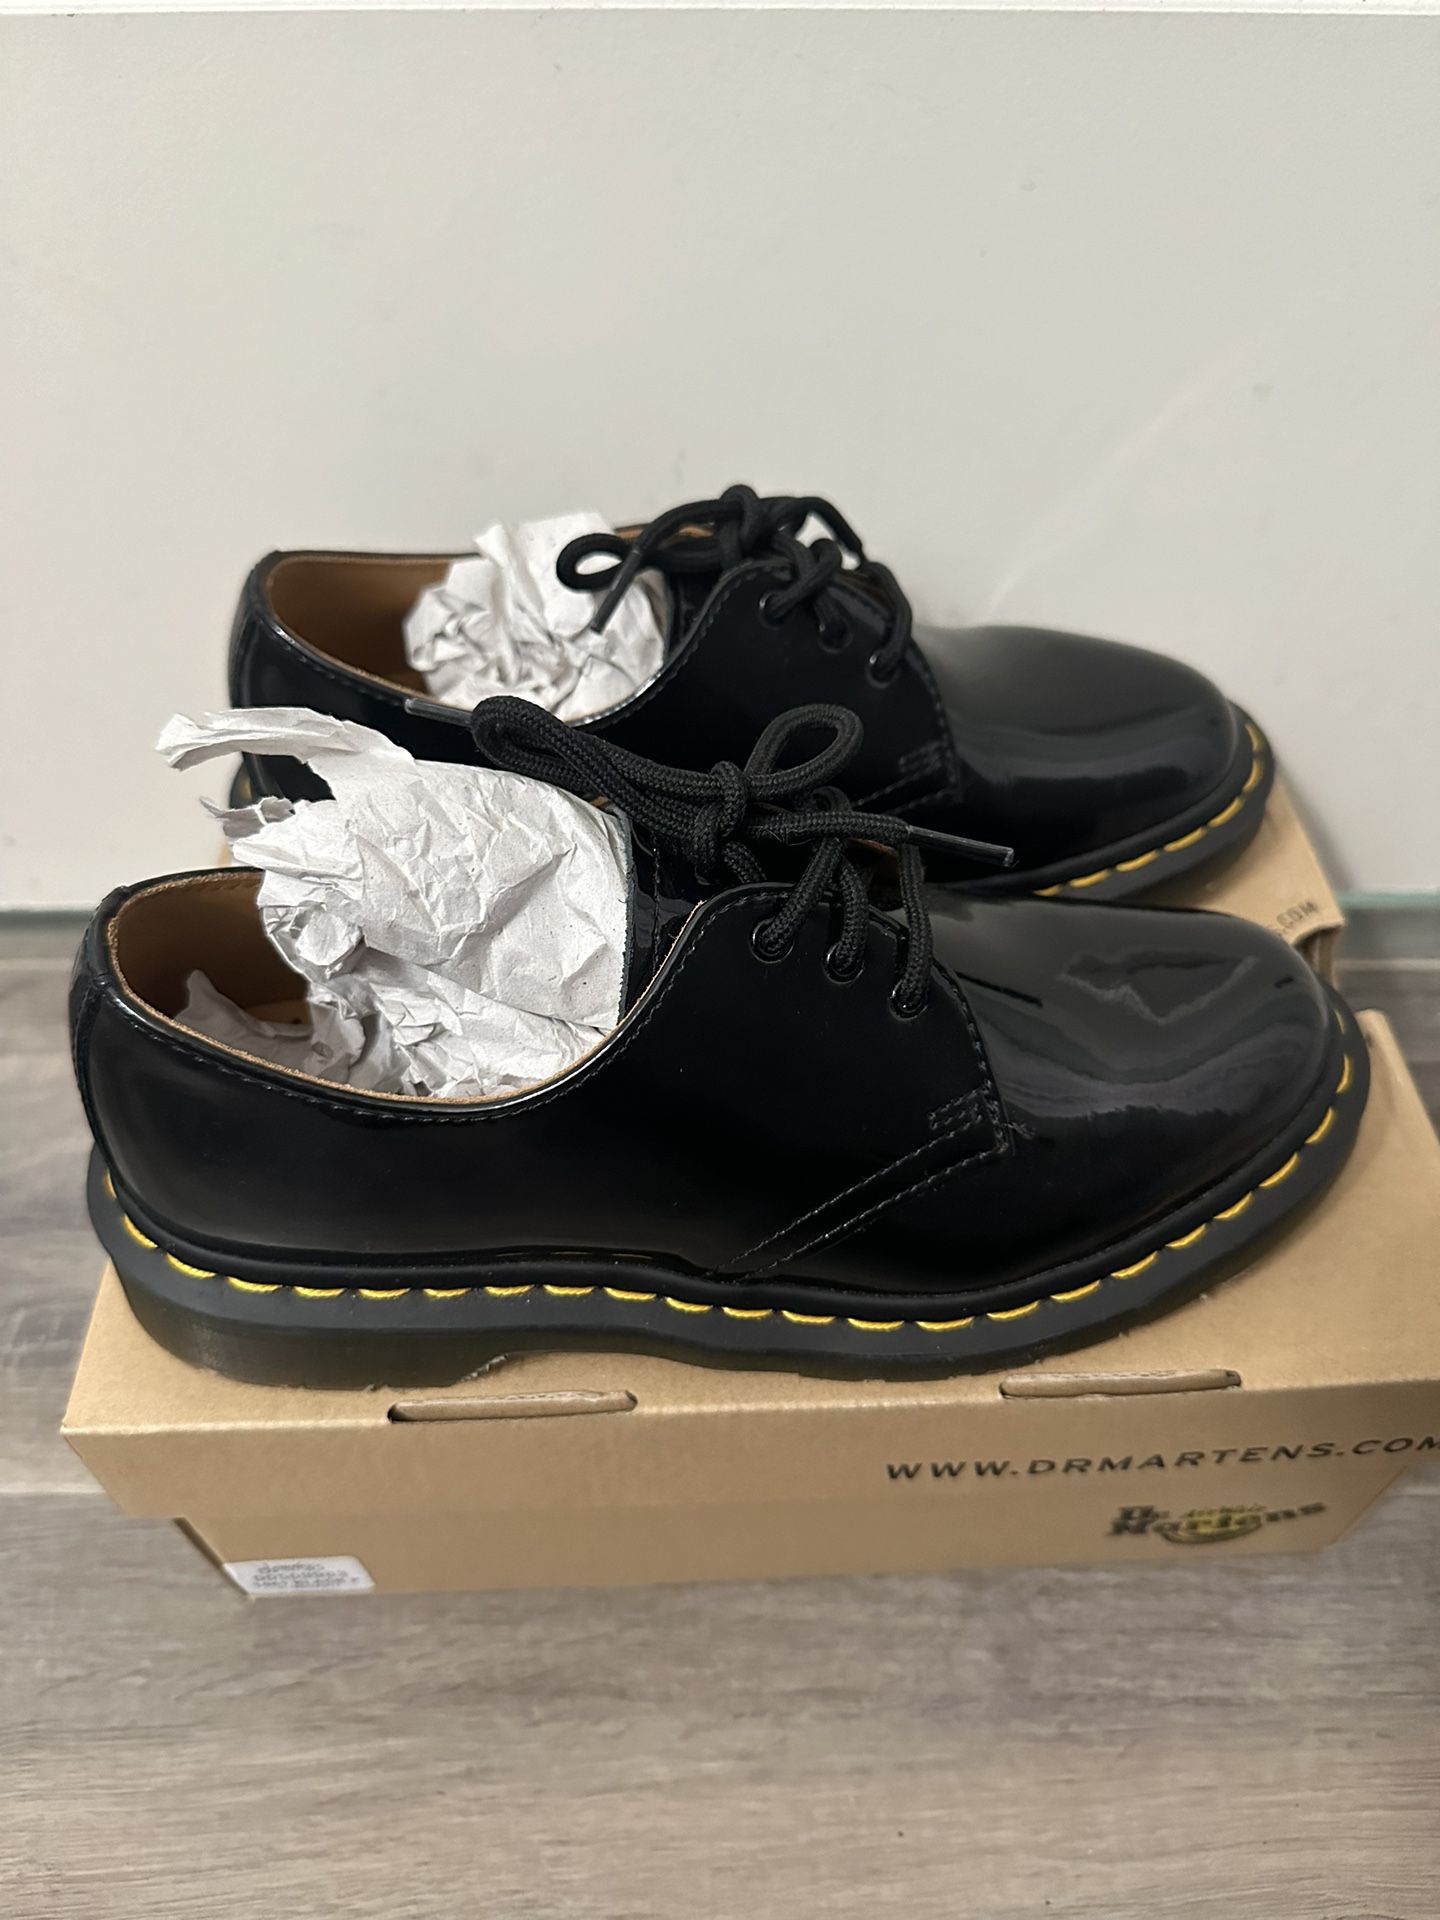 Dr Martens Patent Leather 1461